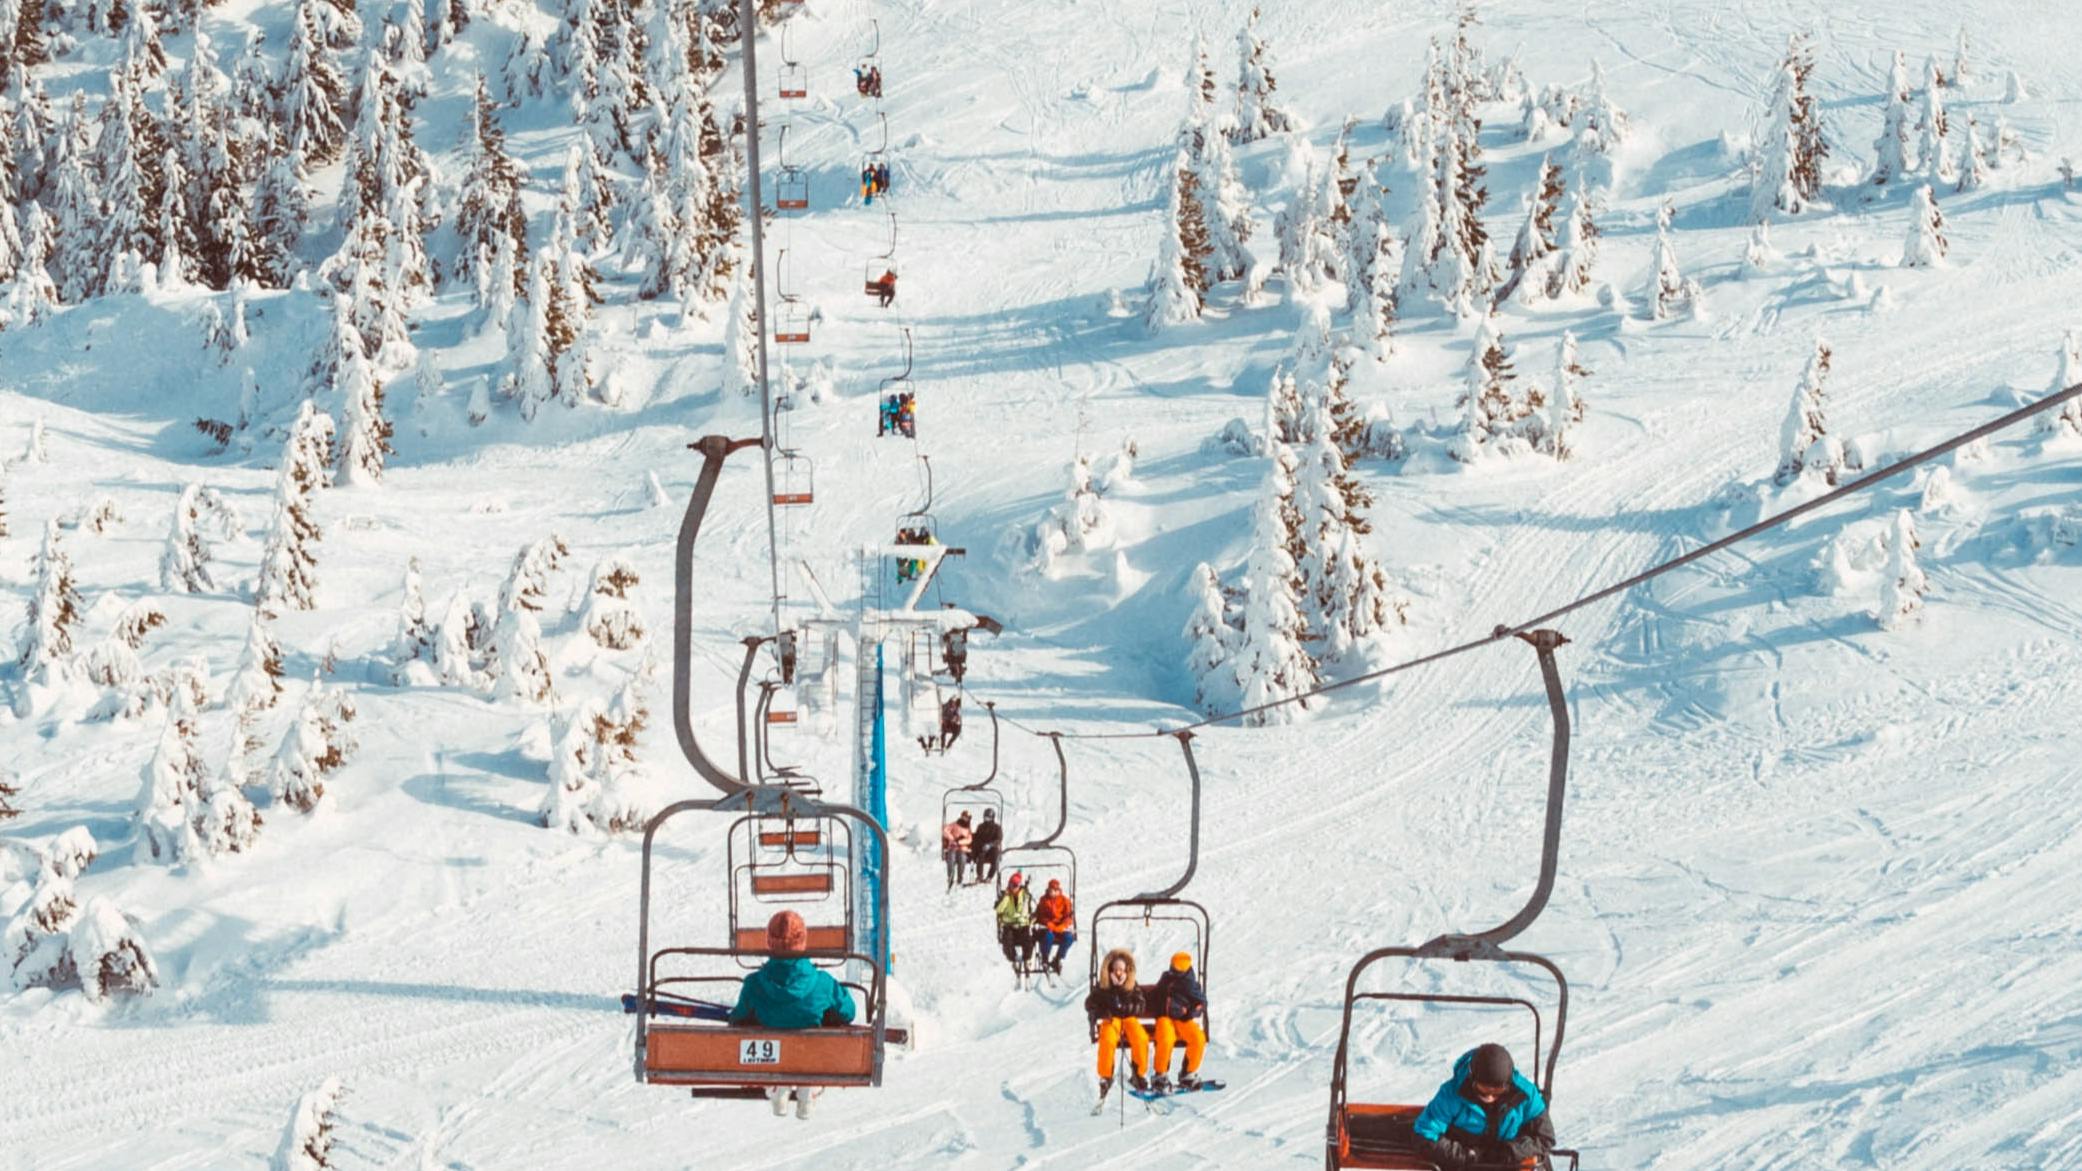 A ski lift with people riding up the mountain. You can see almost the whole lift and it looks pretty busy because there are people in every chair. There is a lot of snow on the ground.